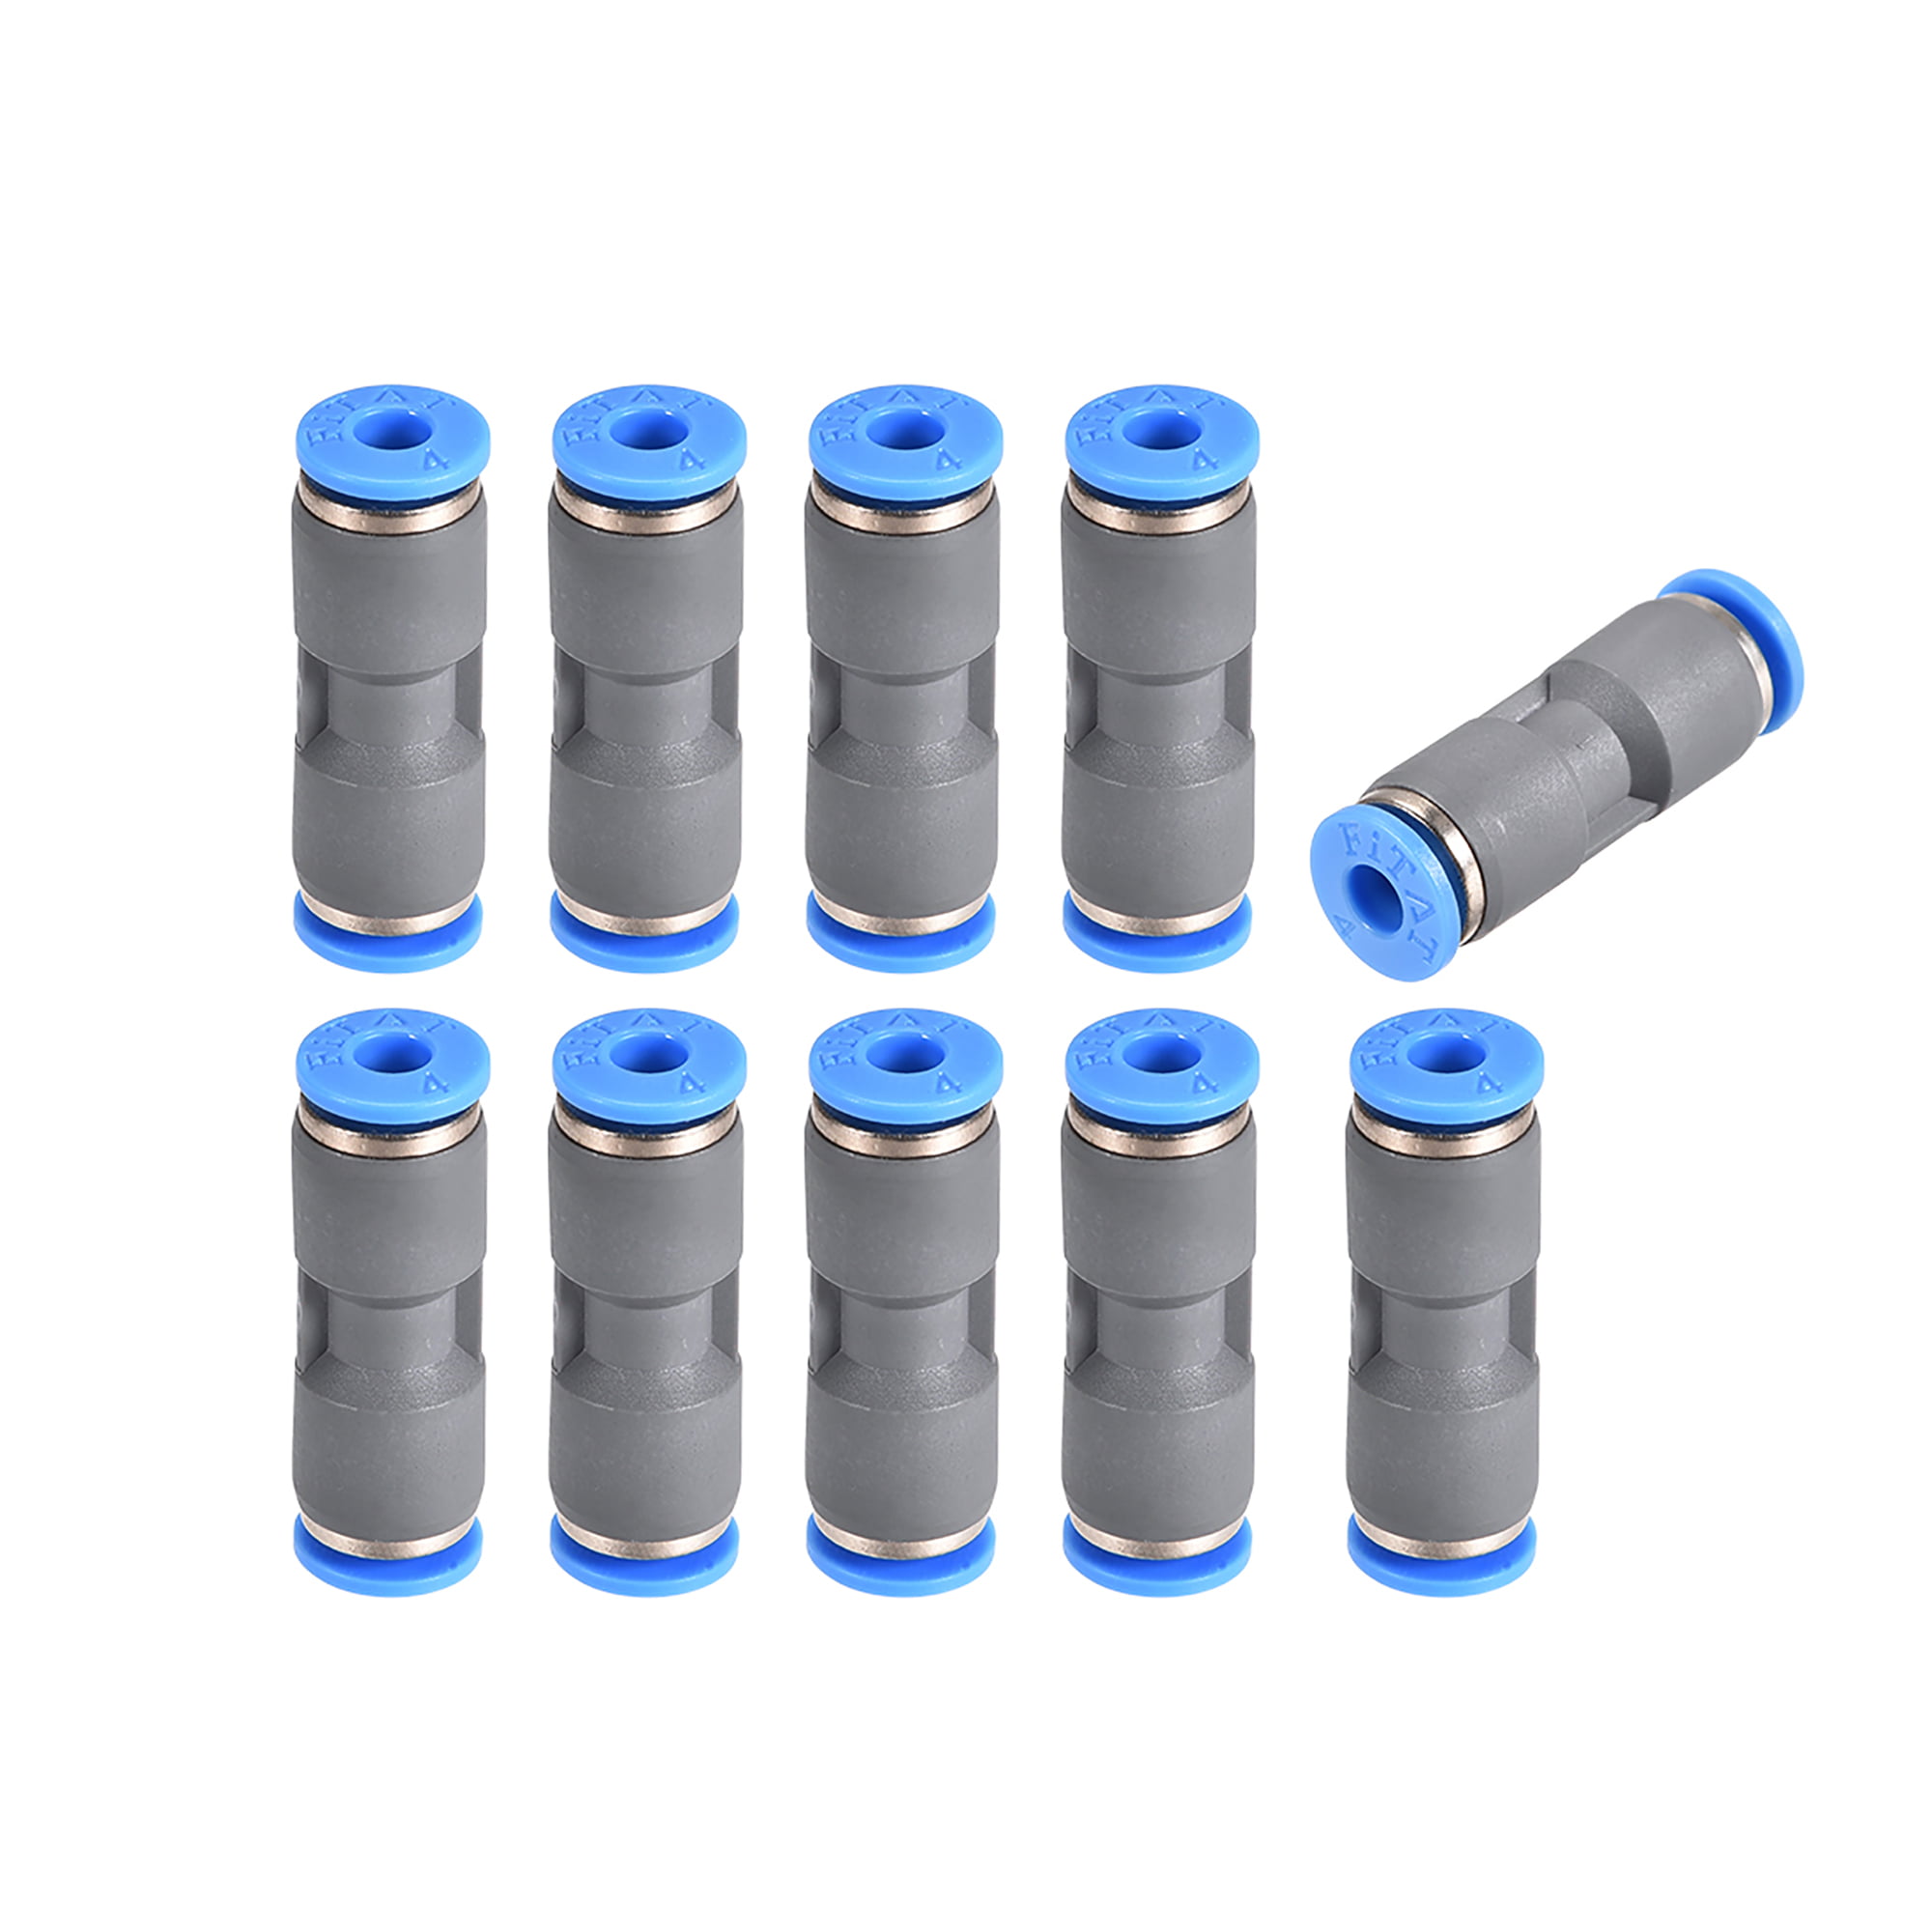 10 Pcs Air Pneumatic 4mm to 4mm Straight Push in Connectors Quick Fittings 